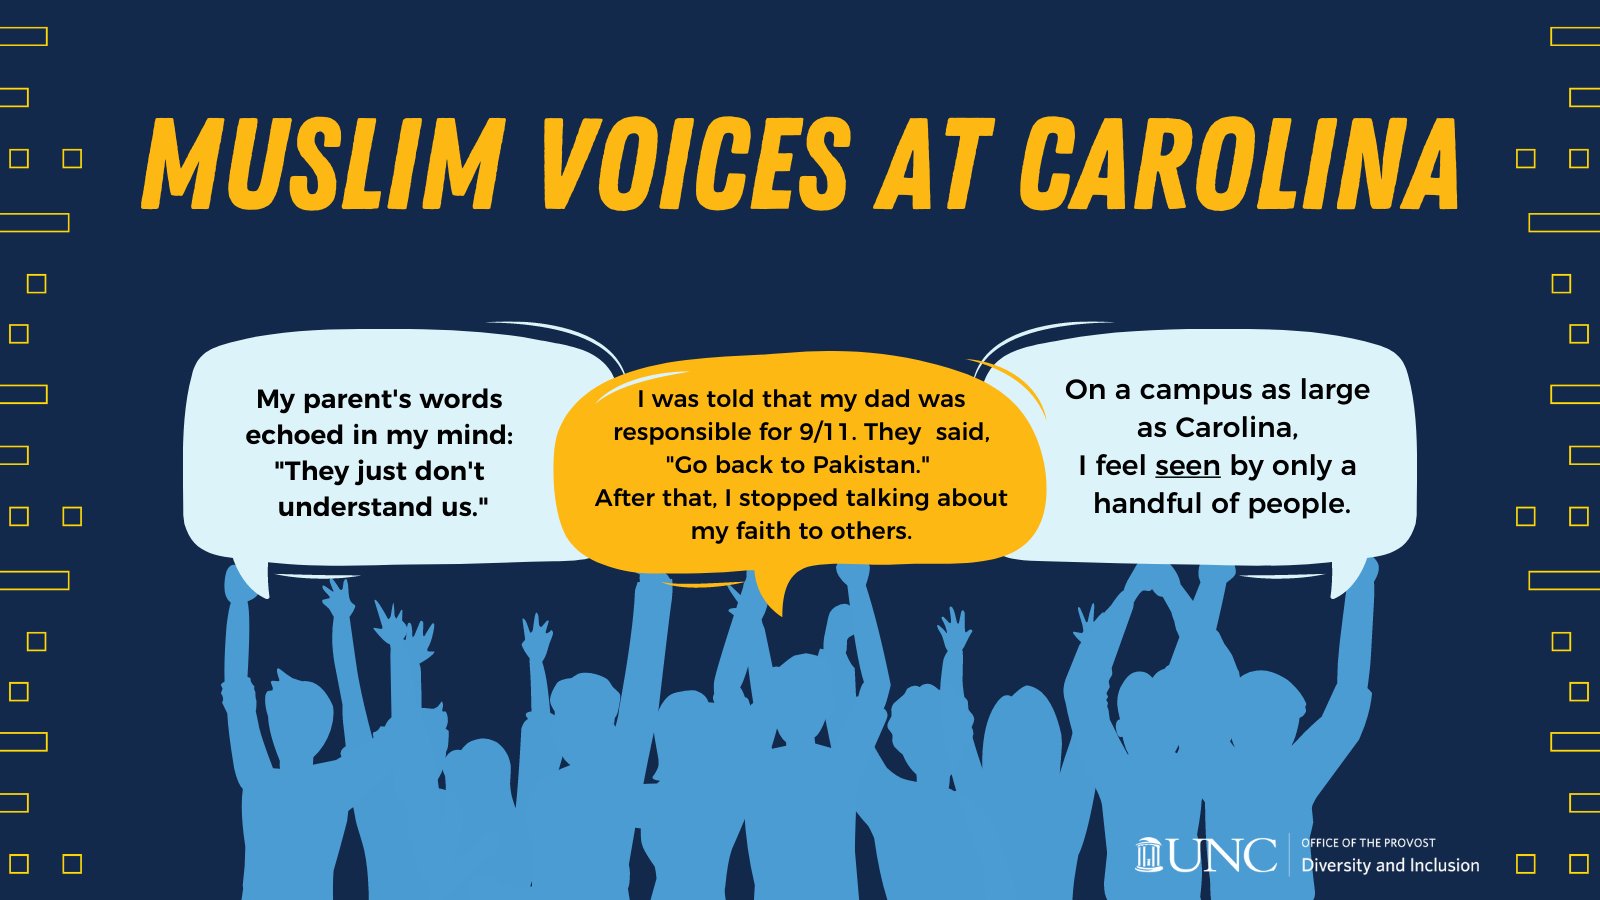 Image of people holding up voice bubbles with title that says, "Muslim Voices at Carolina" and text, "My parent's words echoed in my mind: 'They just don't understand us,'" "I was told that my dad was responsible for 9/11. They said, 'Go back to Pakistan.' After that, I stopped talking about my faith to others," and "On ca campus as large as Carolina, I feel SEEN by only a handful of people"